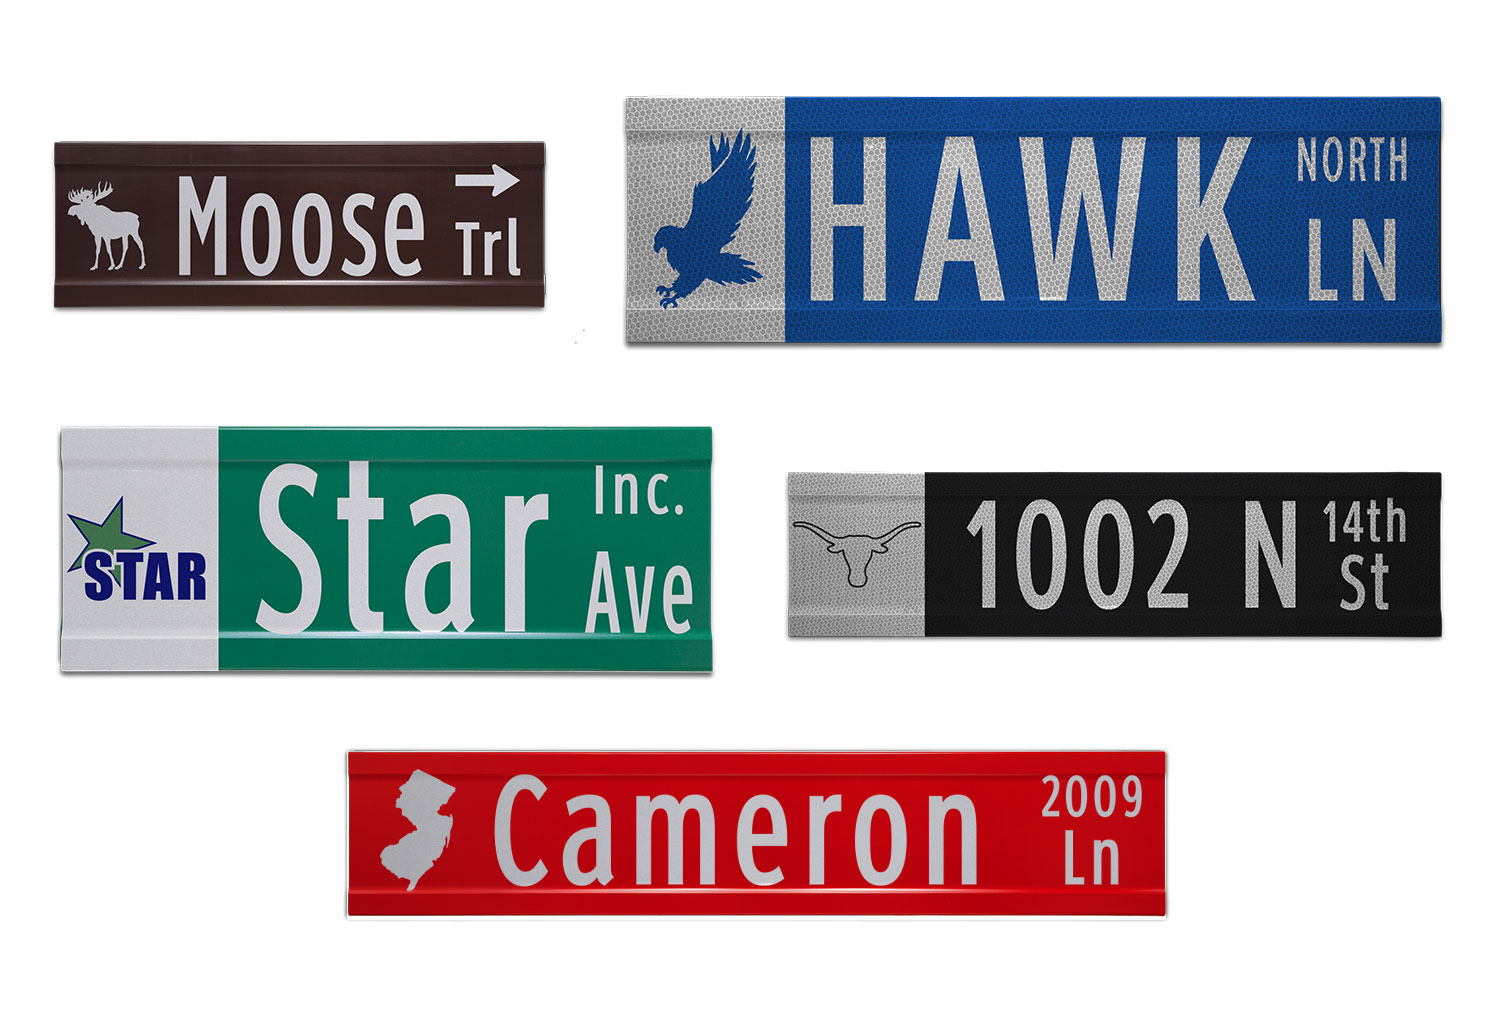 Samples of Printed Extruded Blade Signs with Images and Street Numbers